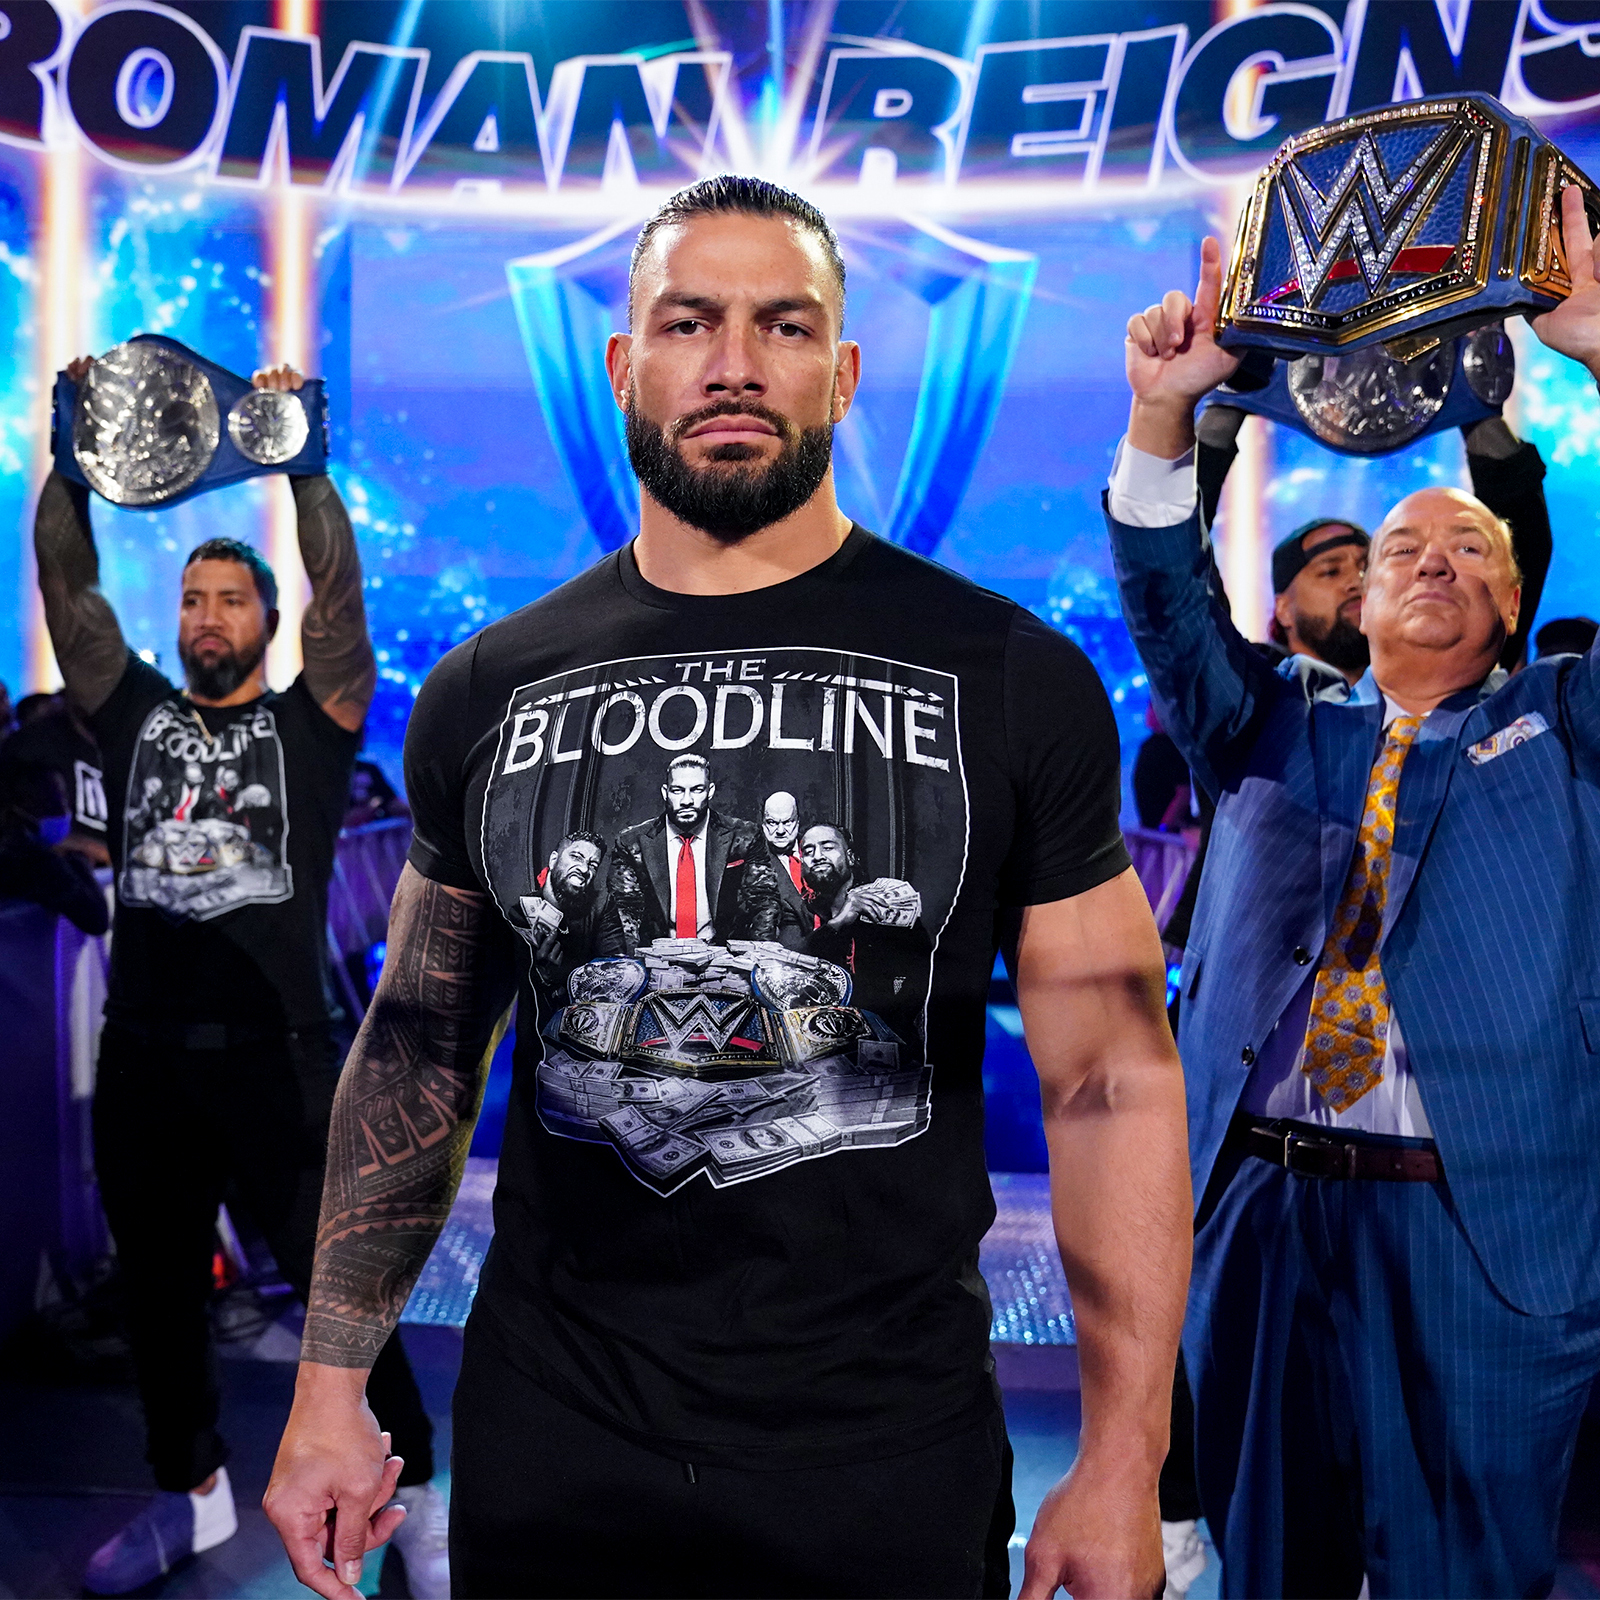 Where Do Roman Reigns & The Bloodline Go from WrestleMania 38?